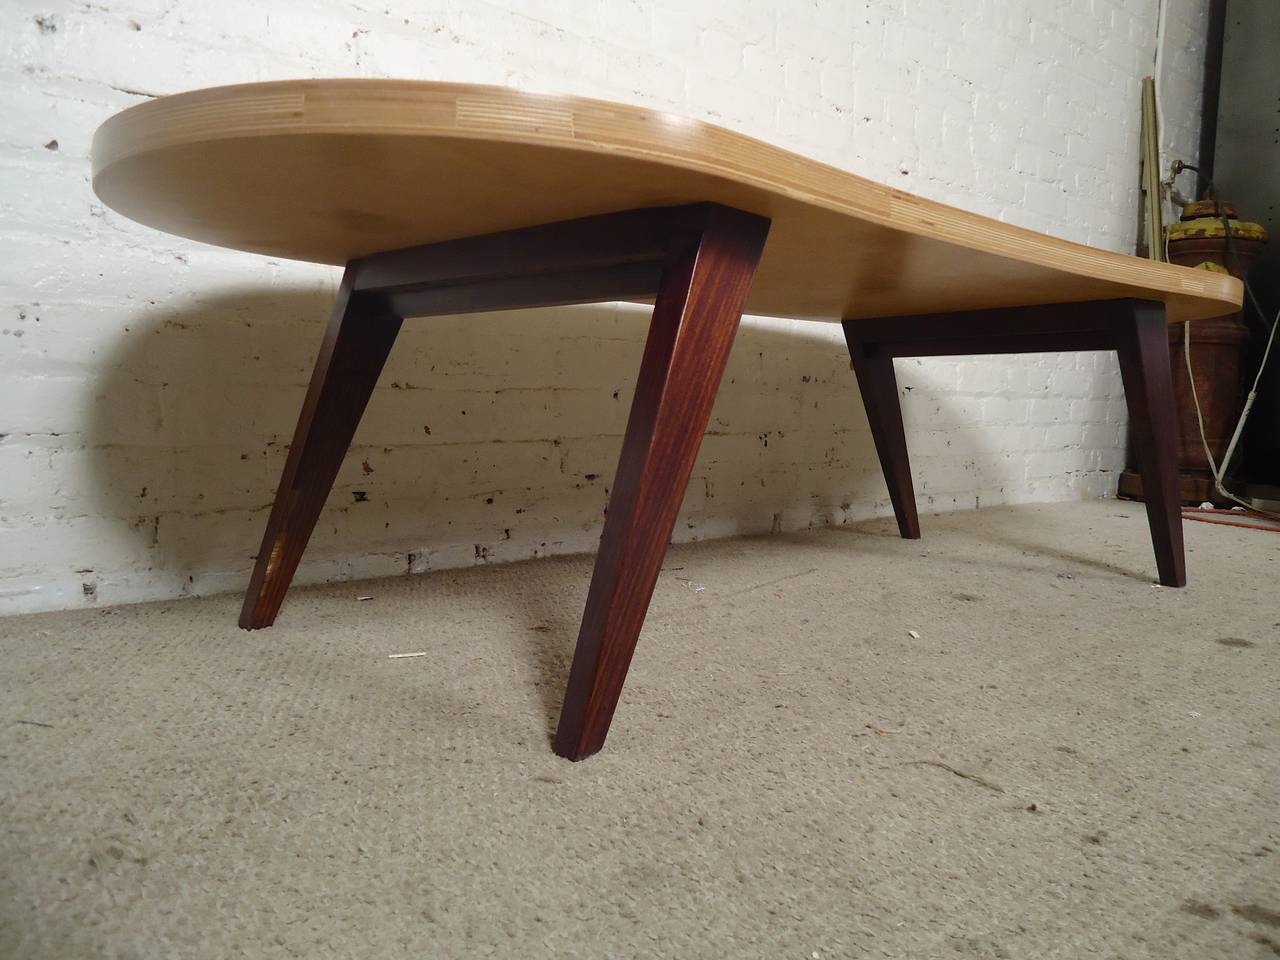 Vintage style plywood kidney shaped coffee table. Blonde finish with accenting dark stained tapered legs.

(Please confirm item location - NY or NJ - with dealer)